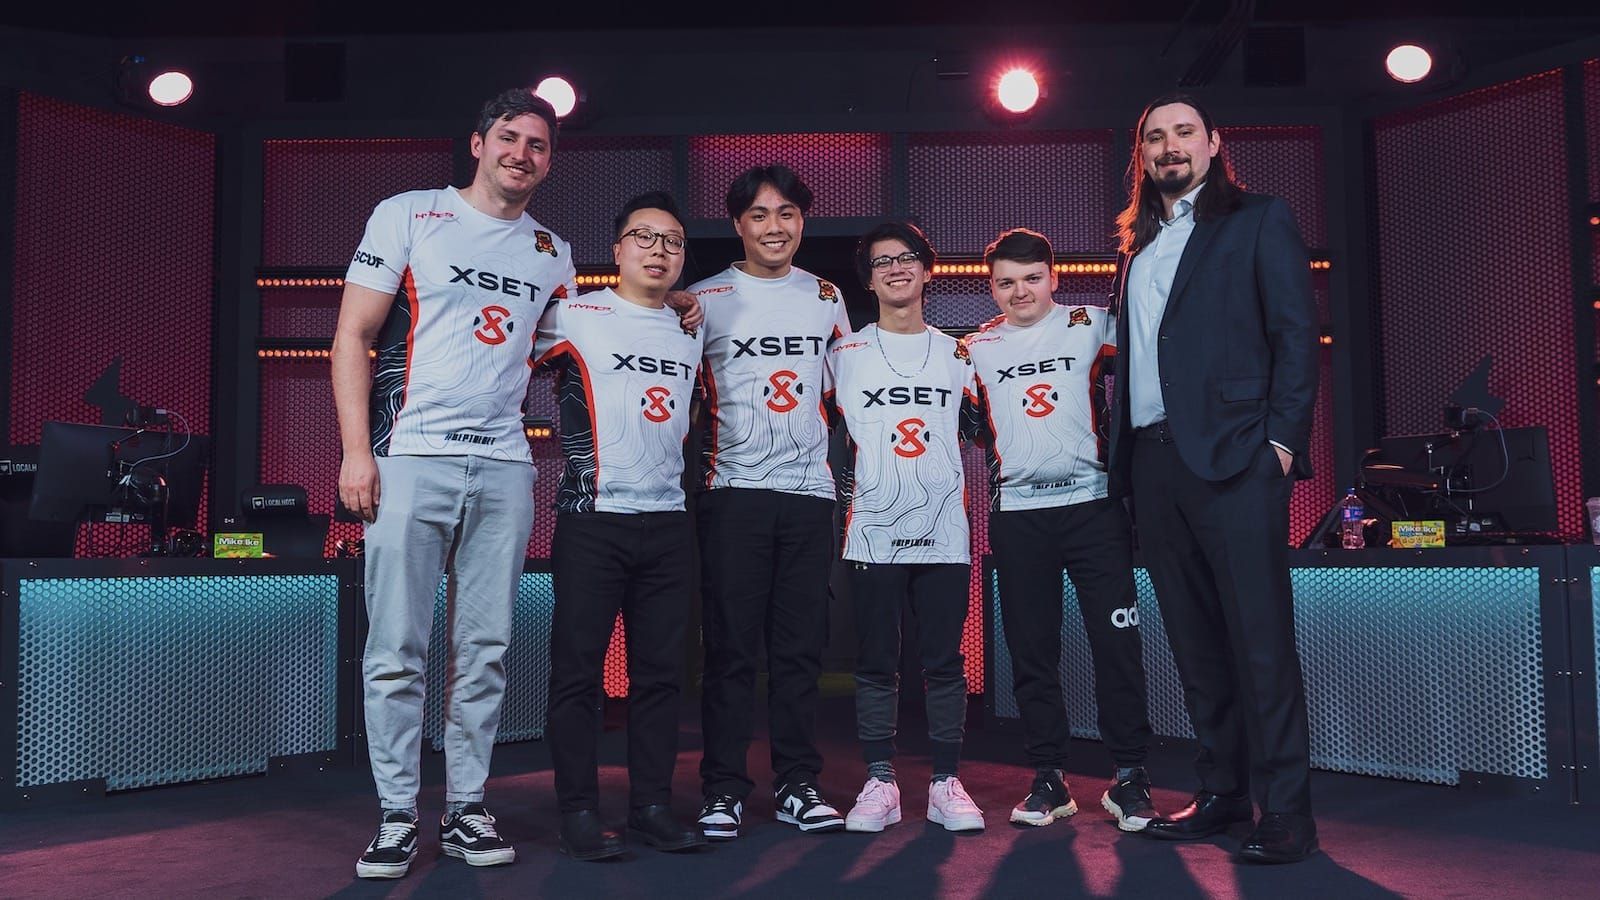 XSET Valorant team pose for a photo onstage at a tournament